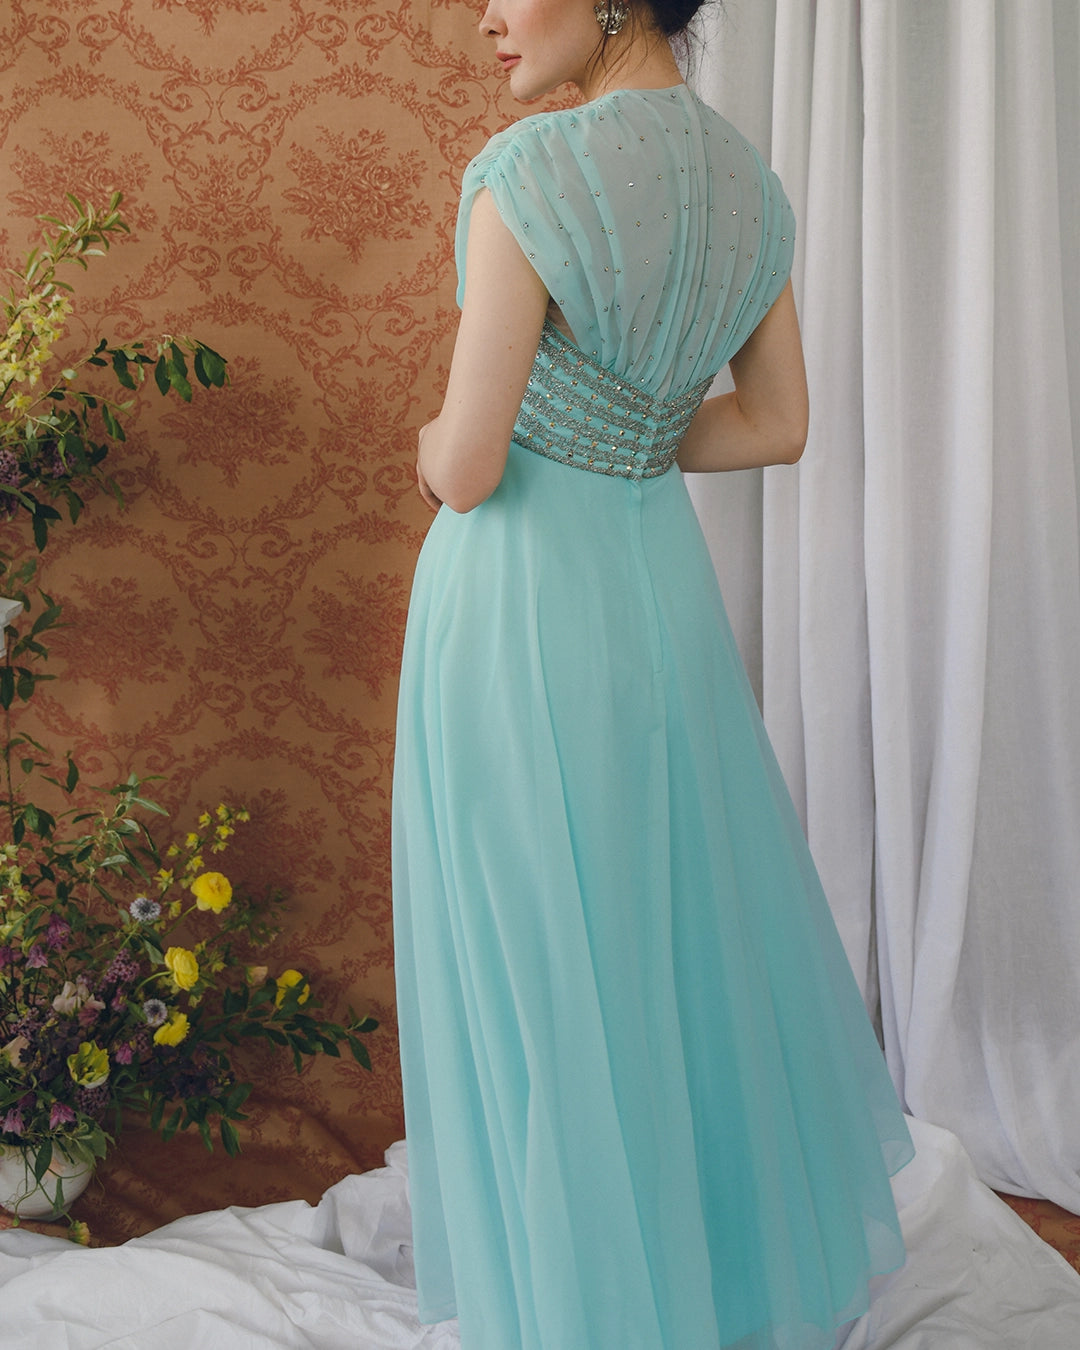 EARLY 1960s EMPIRE WAIST EMBELLISHED TULLE GOWN